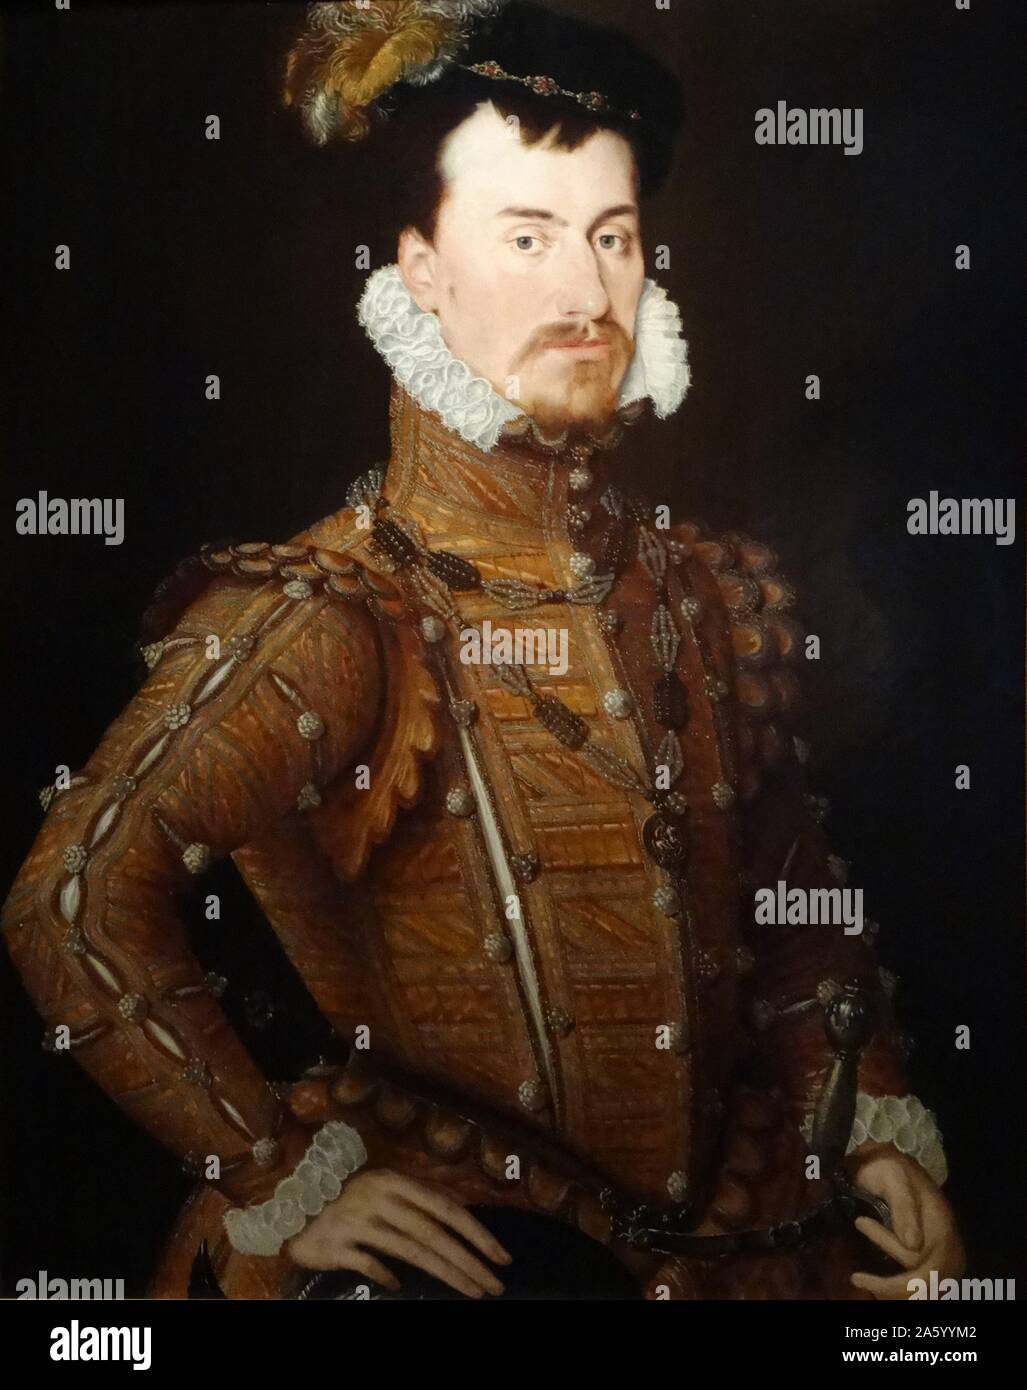 portrait of Robert Dudley, 1st Earl of Leicester attributed to Steven van der Meulen (active 1543-1564) Flemish artist. Dated 16th Century Stock Photo